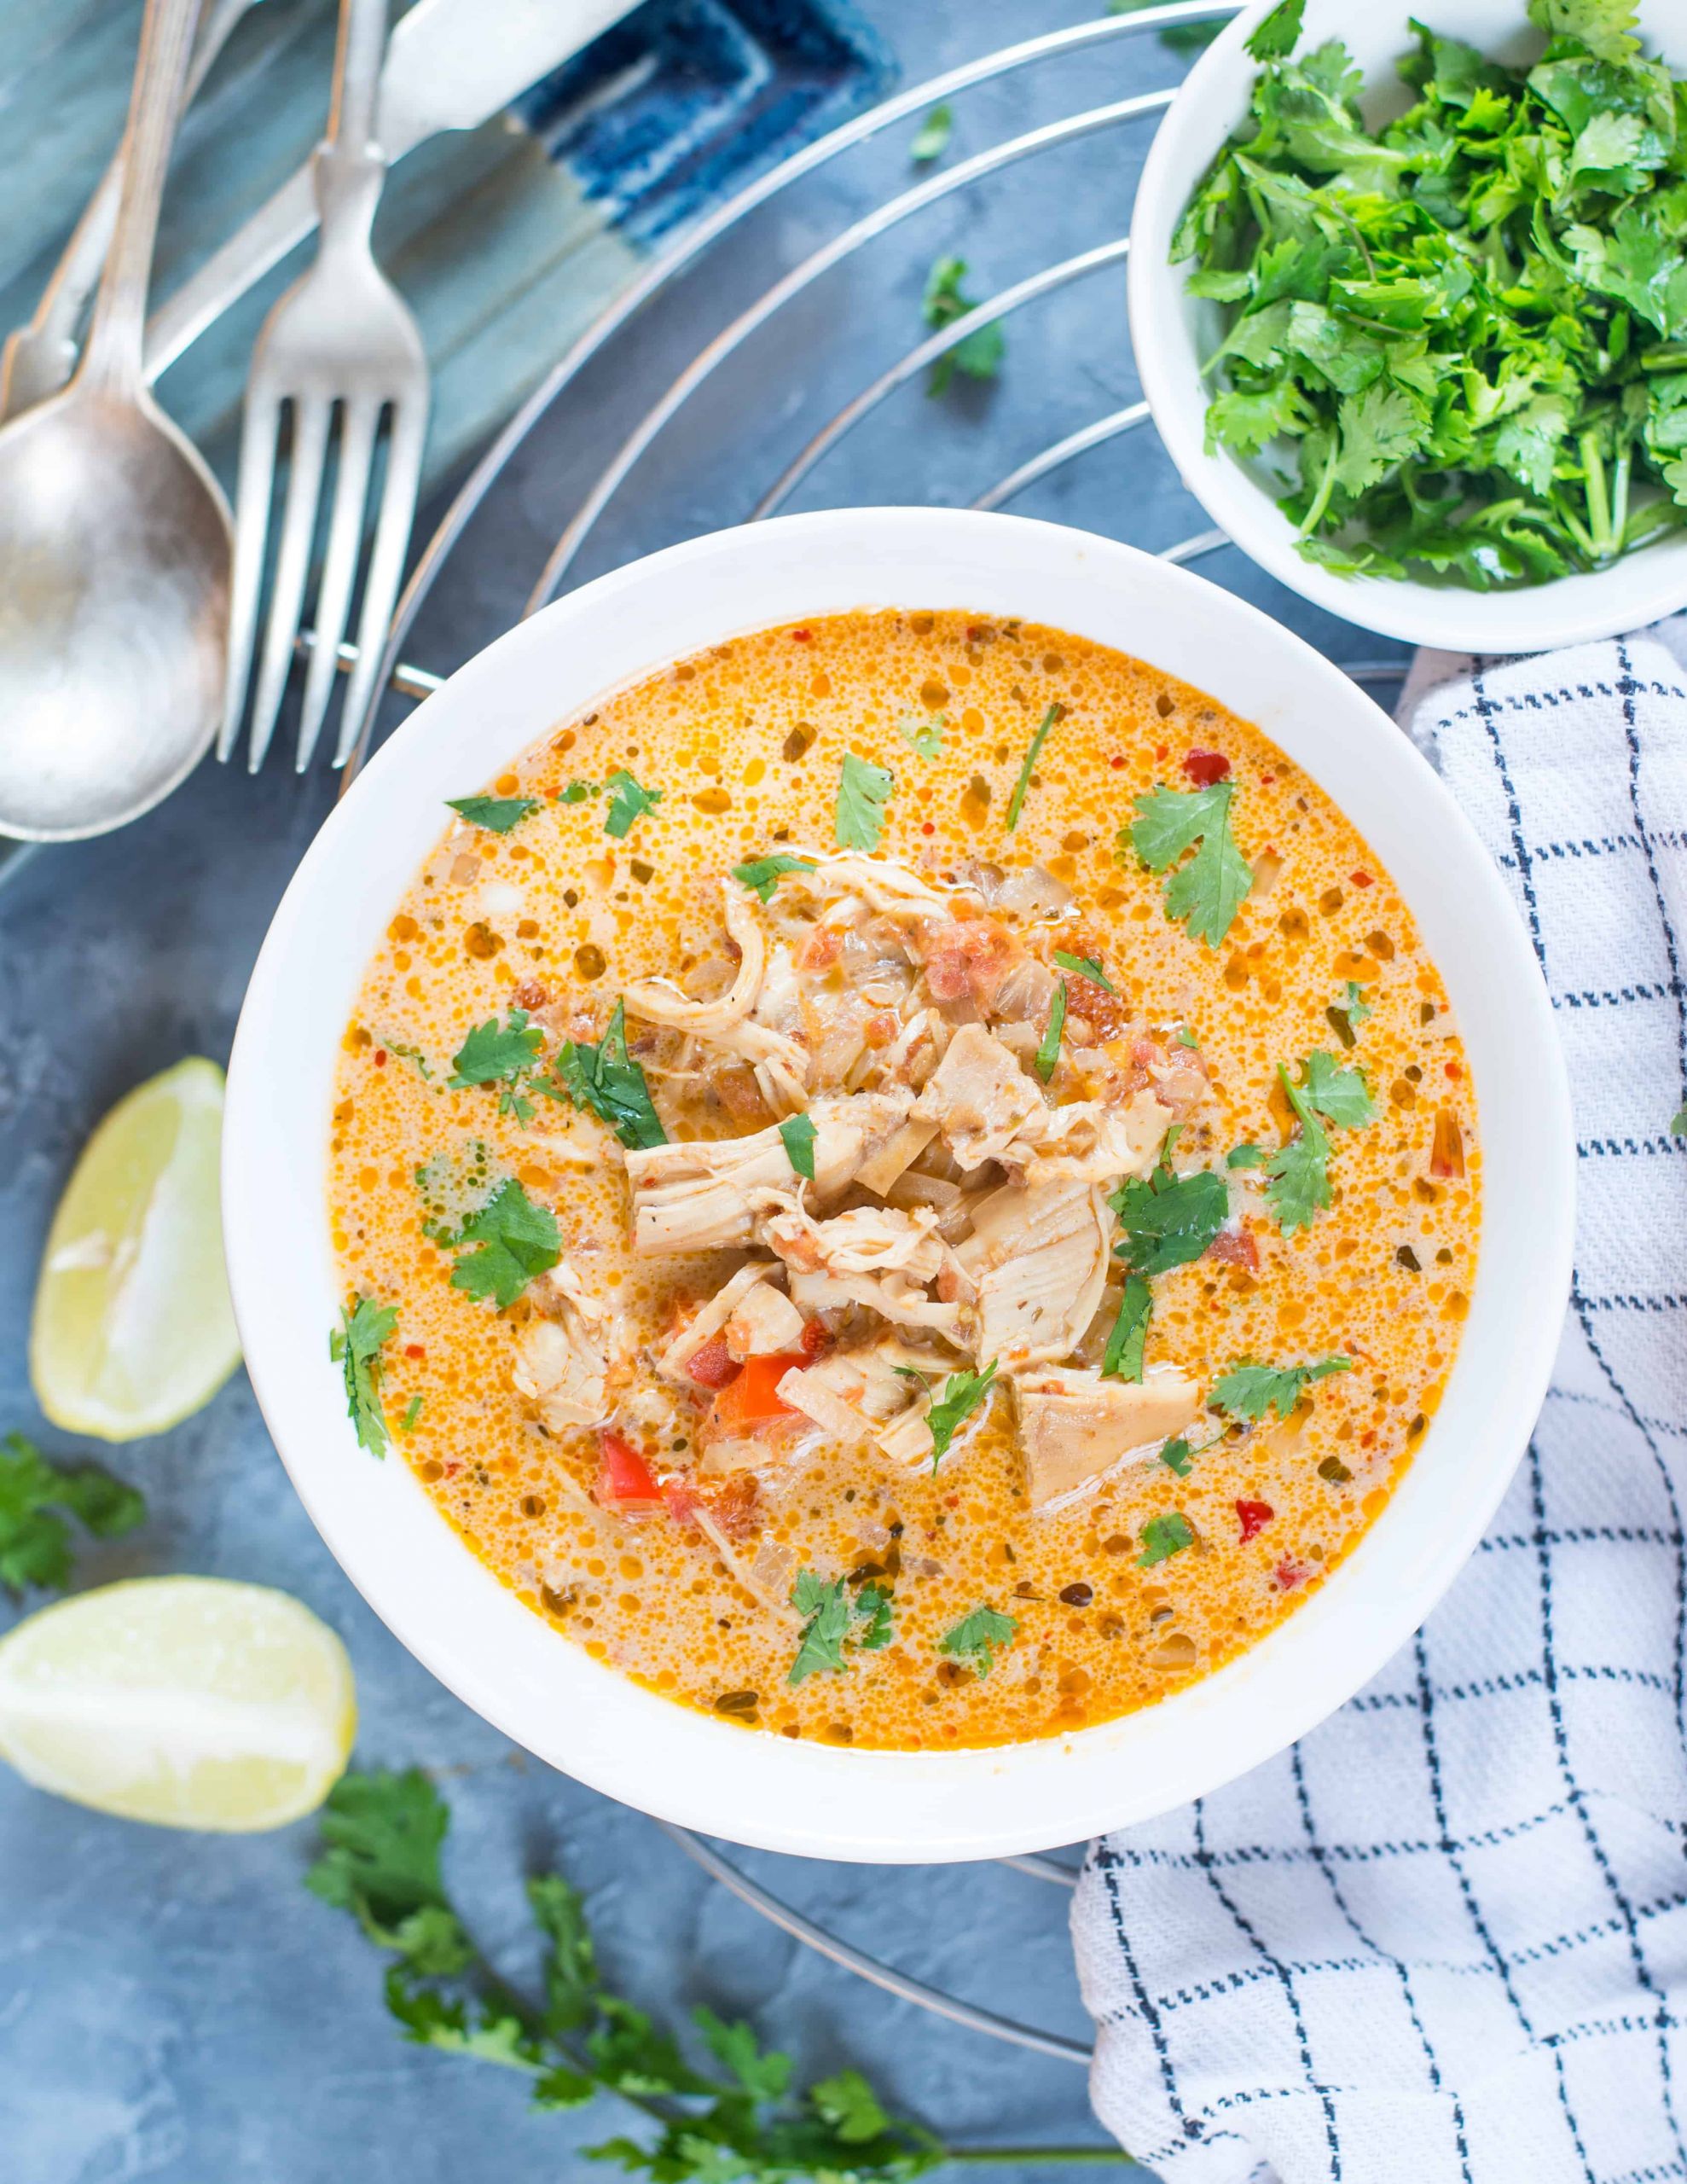 Mexican Keto Soup
 SLOW COOKER MEXICAN CHICKEN SOUP The flavours of kitchen